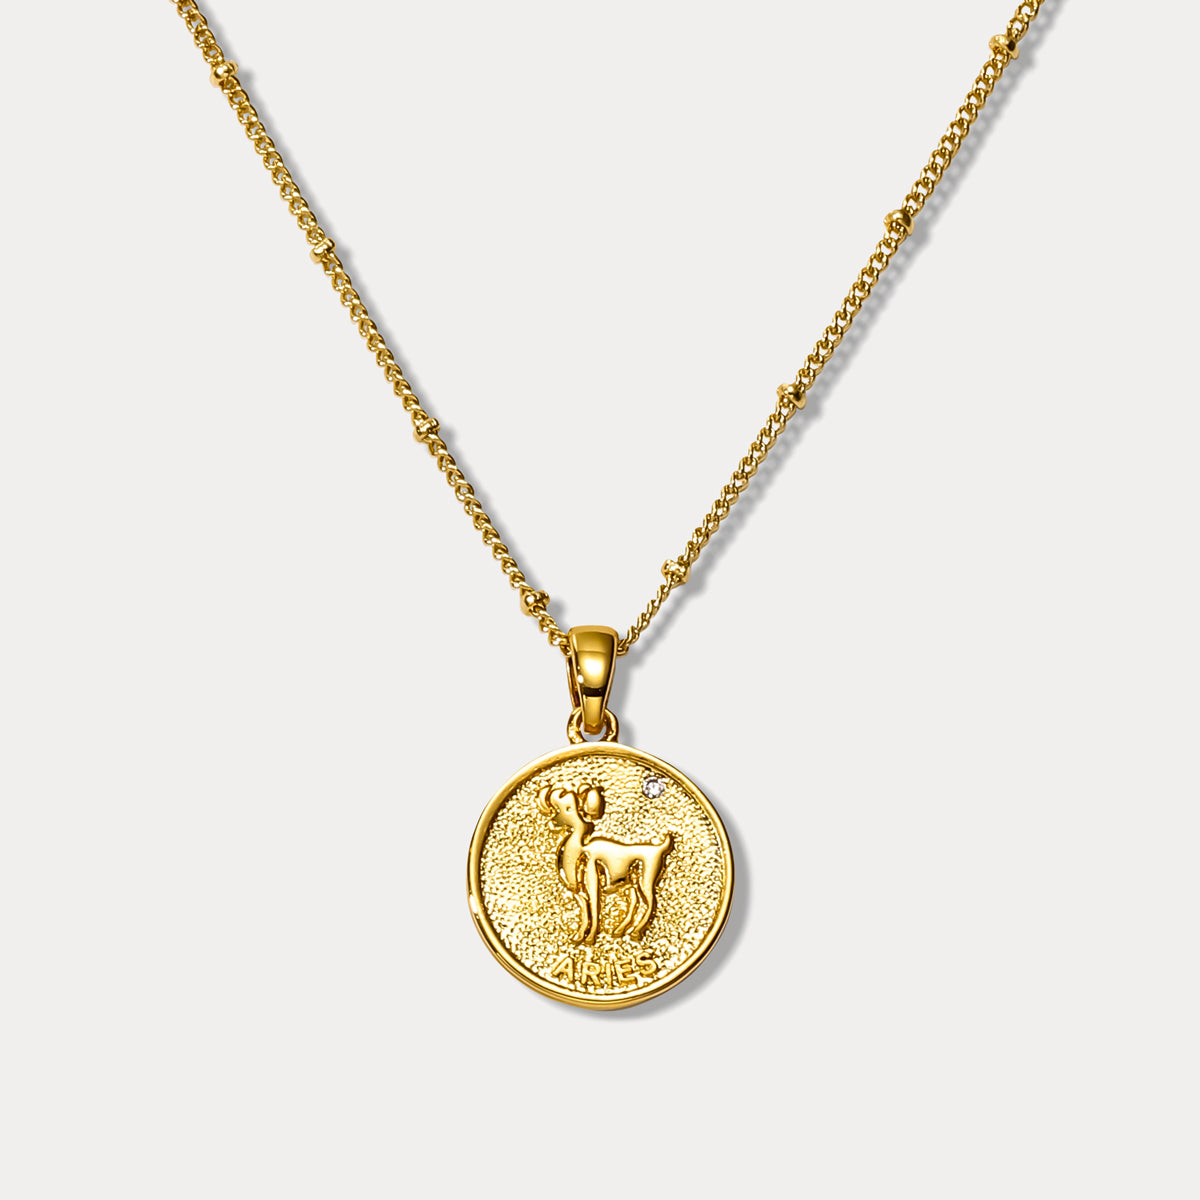 Selenichast aries constellation coin pendant necklace